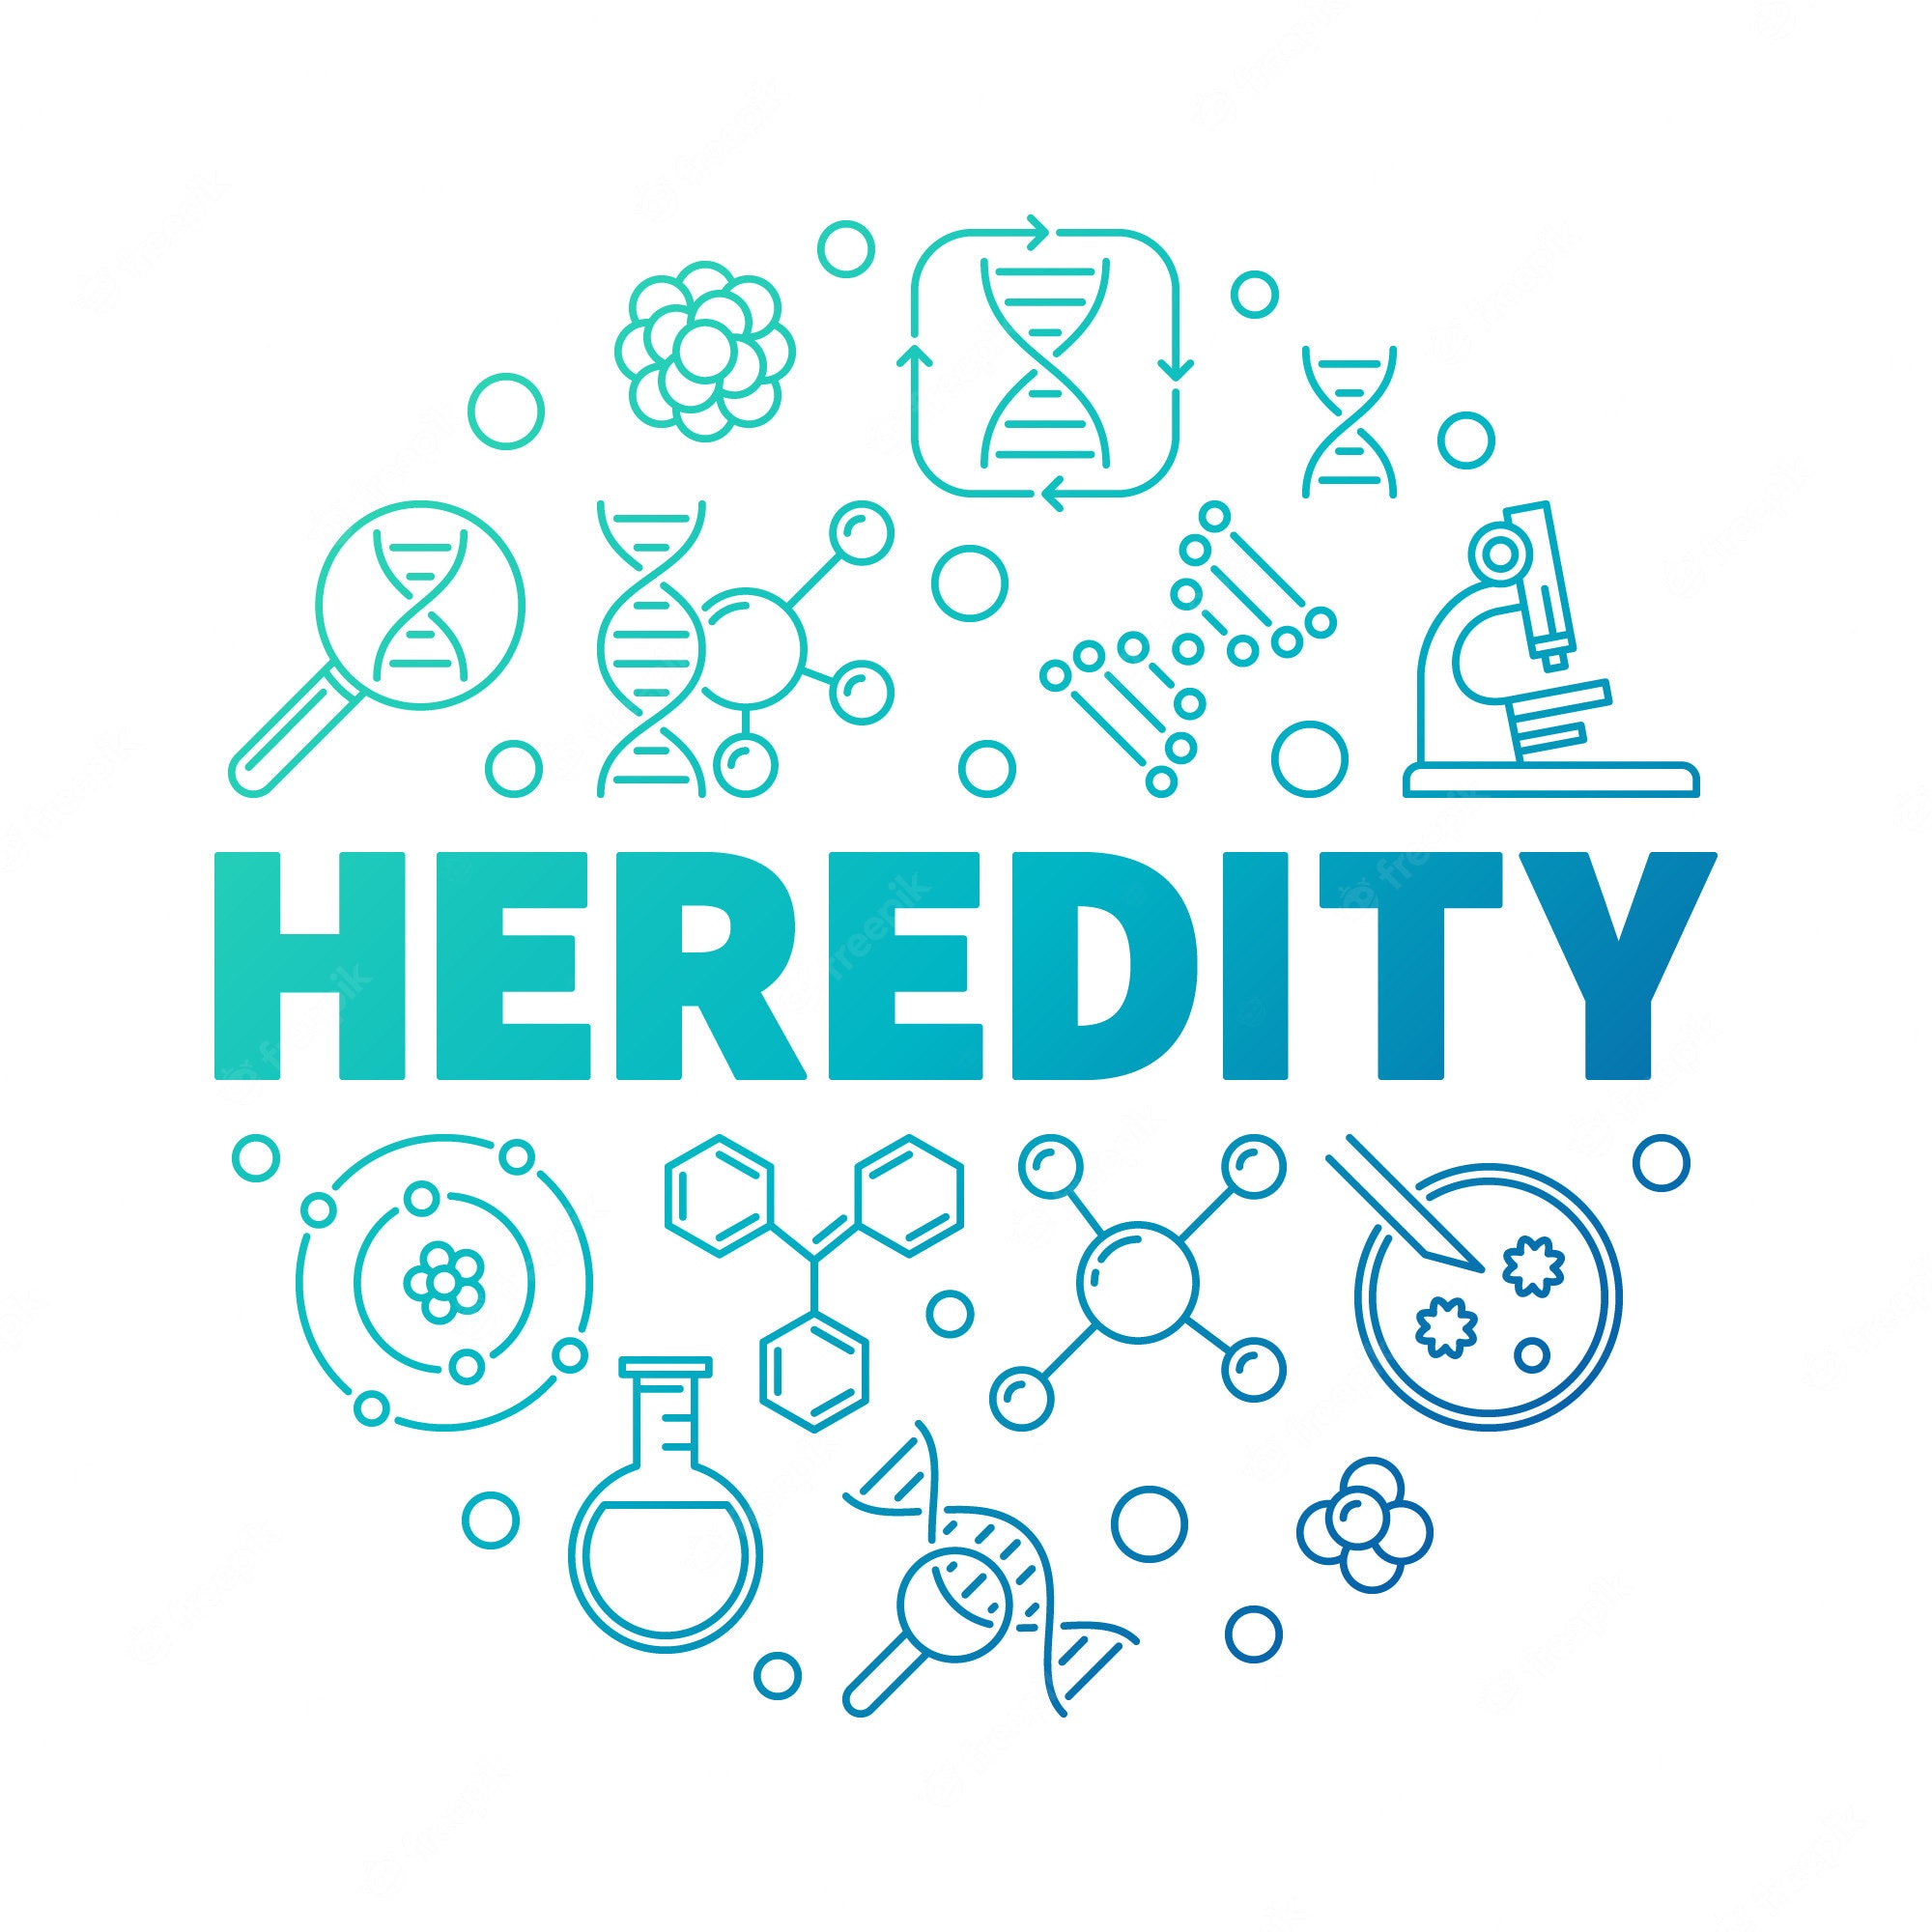 introduction to heredity - Class 5 - Quizizz